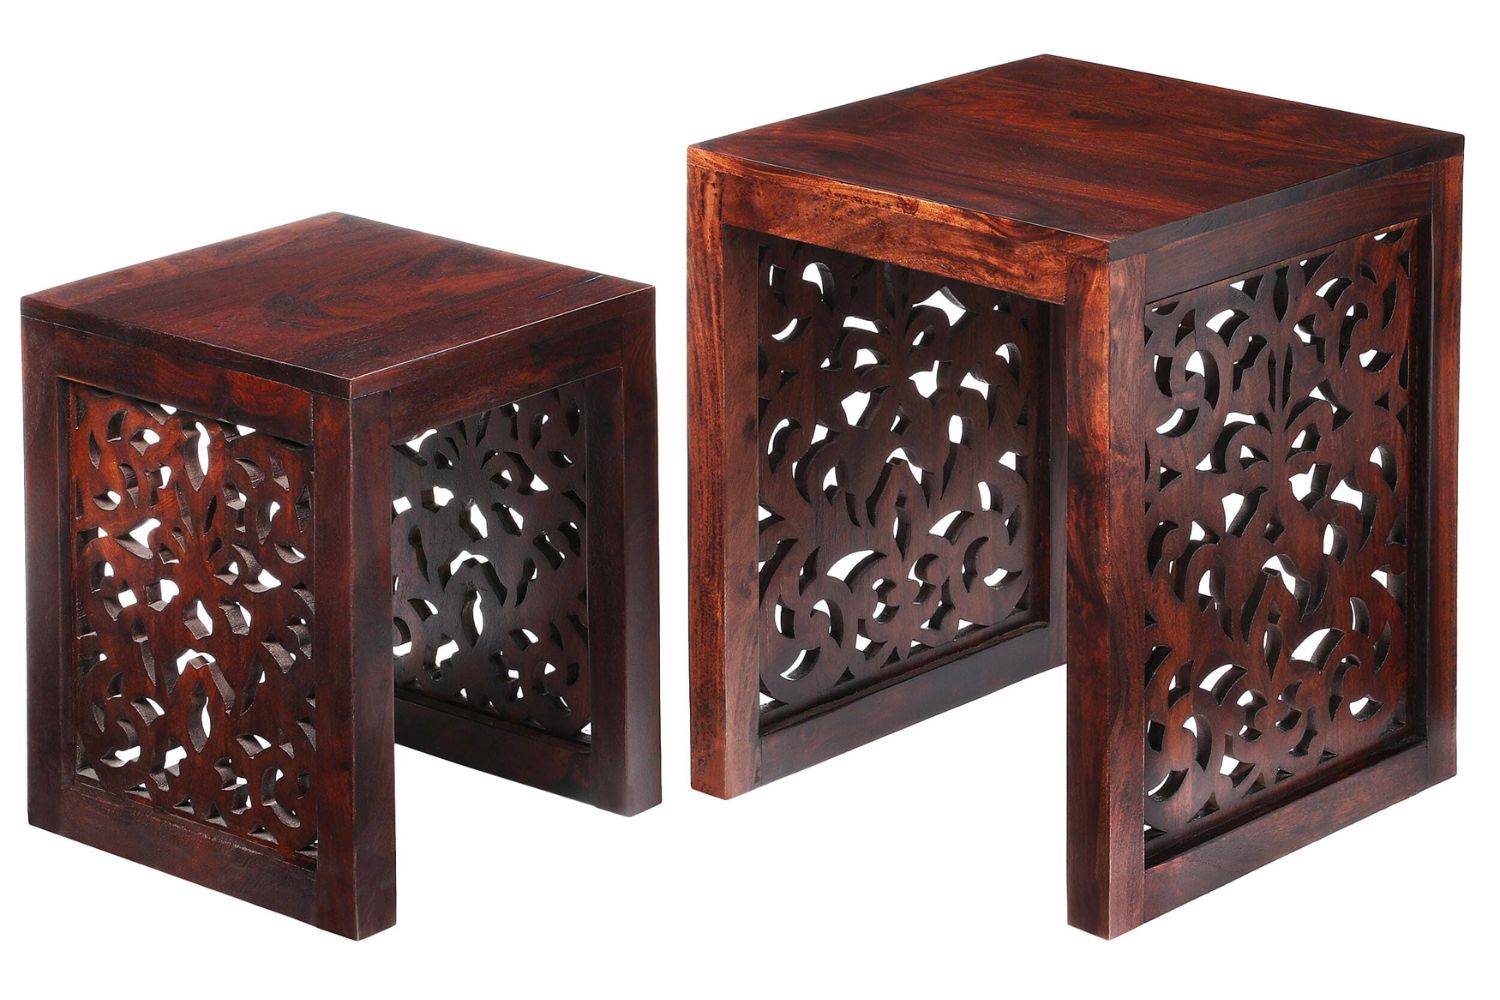 The Best Furniture You Can Find at Home Depot Right Now: Home Decorators Collection Maharaja Walnut 2-Piece Nesting End Table